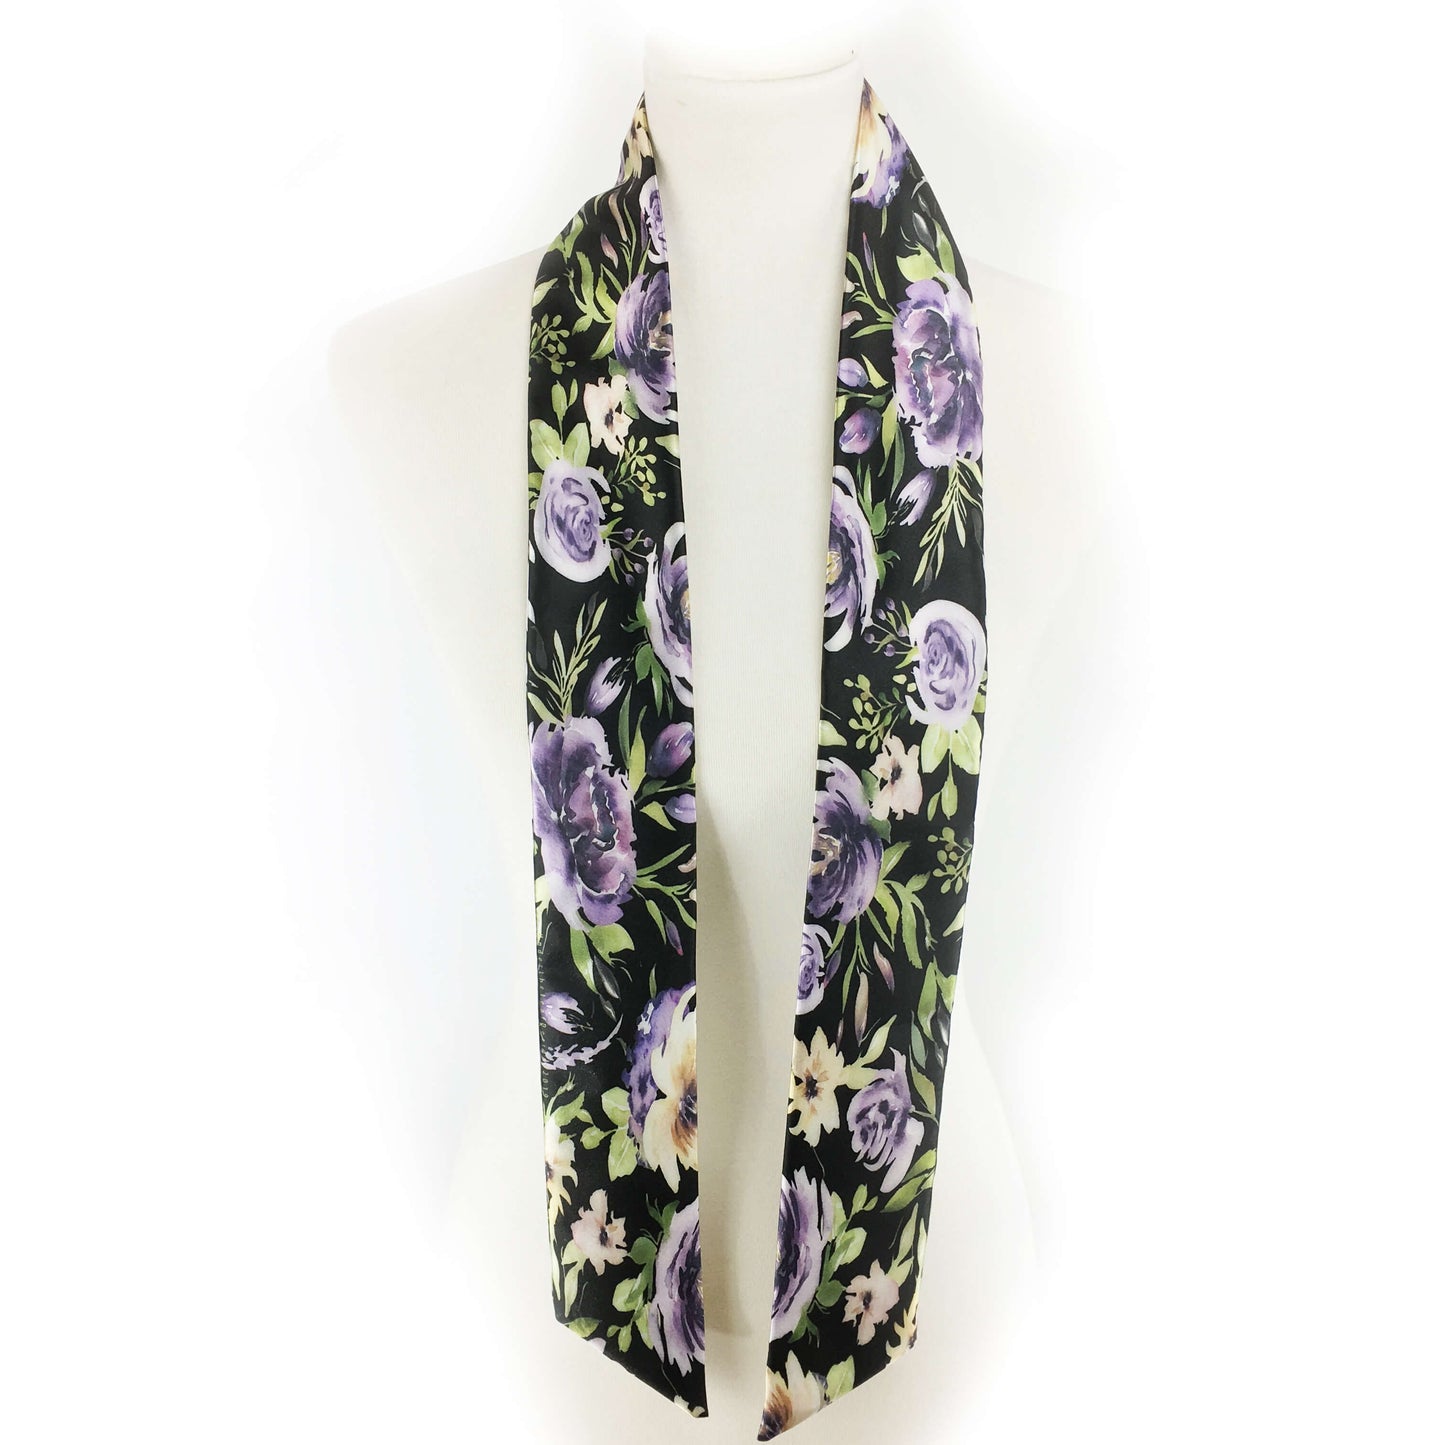 Watercolor mixed floral skinny scarf on black - UndertheLeafDesigns.com